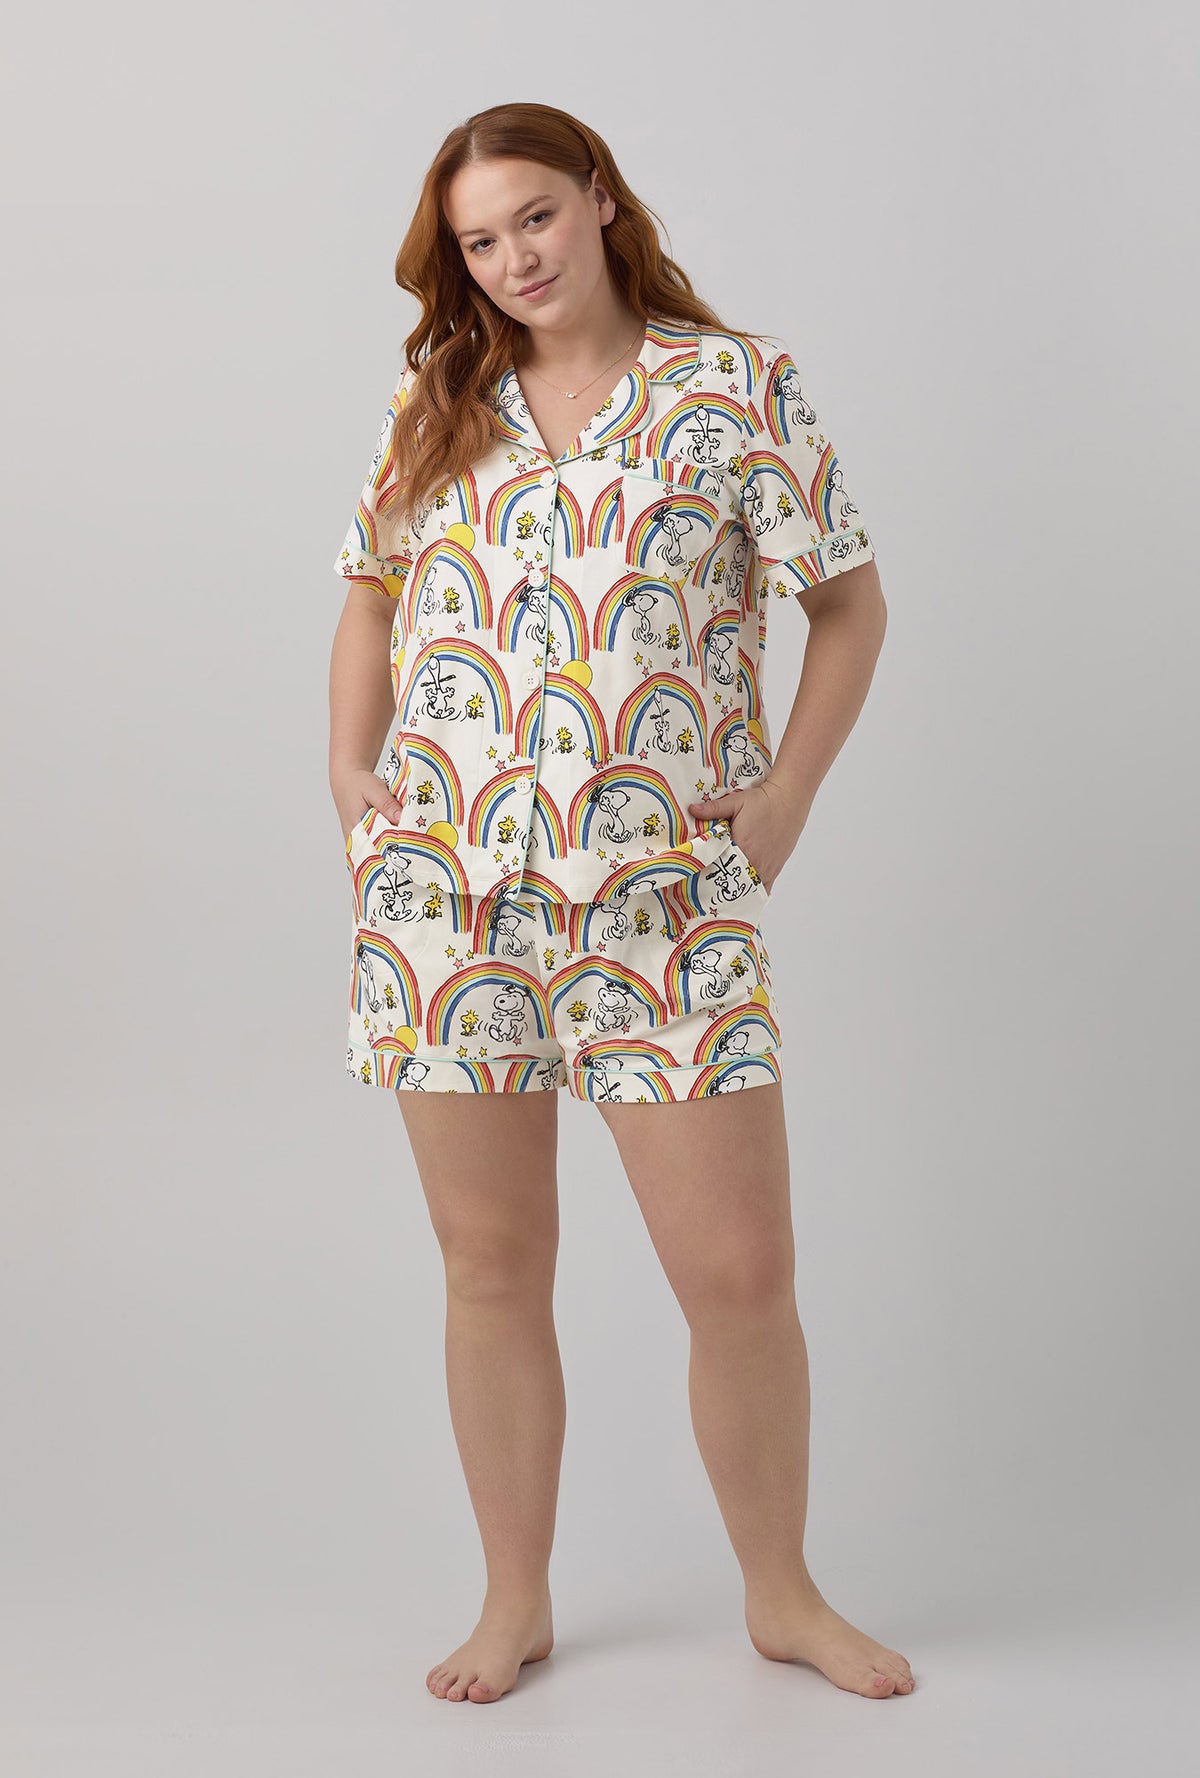 A lady wearing plus size white Short Sleeve Classic Shorty Stretch Jersey PJ Set with Sunshine Snoopy  print.